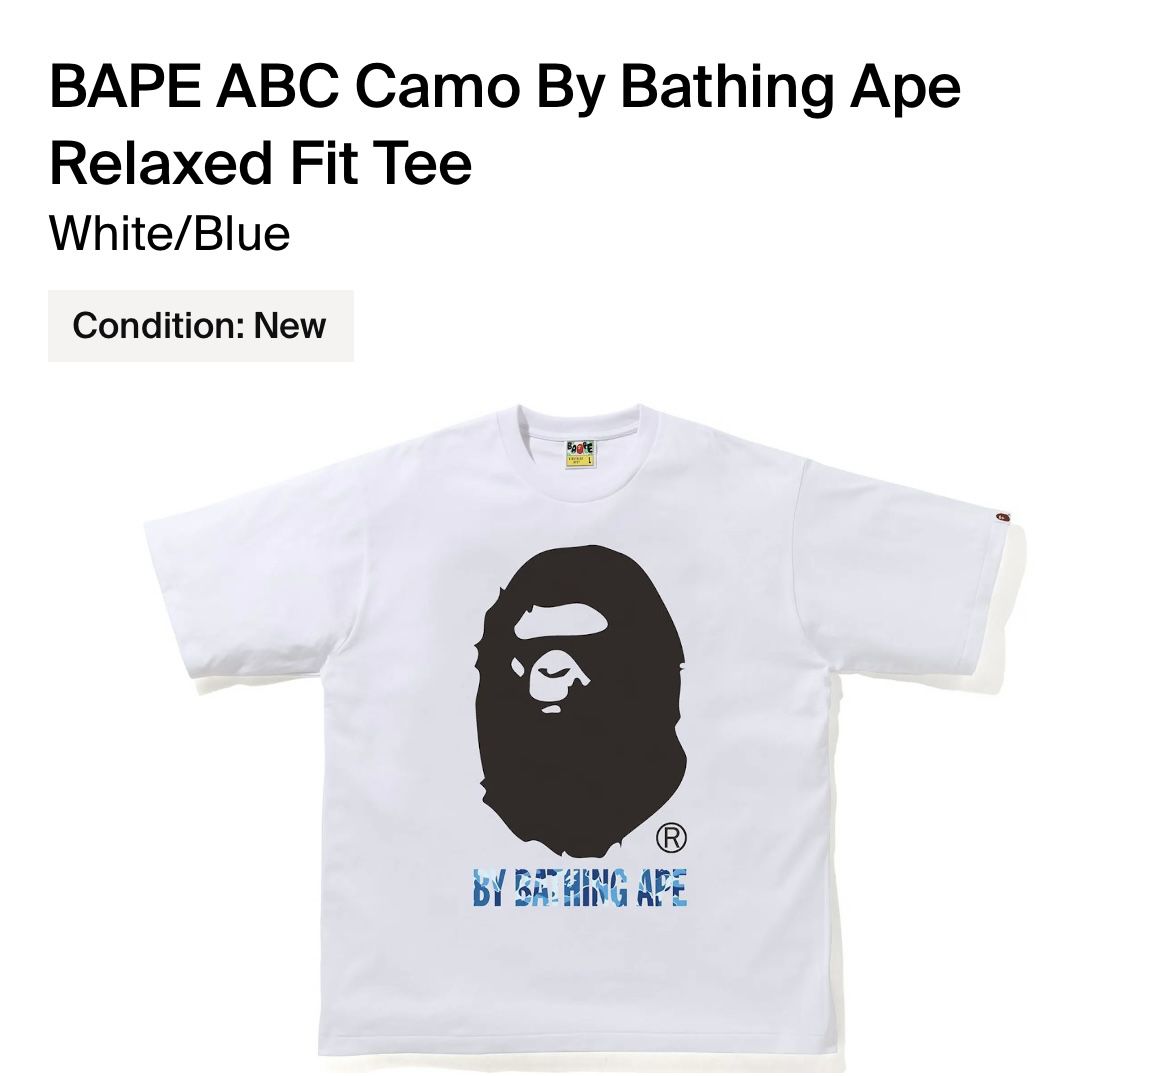 BAPE ABC Camo By Bathing Ape Relaxed Fit Tee